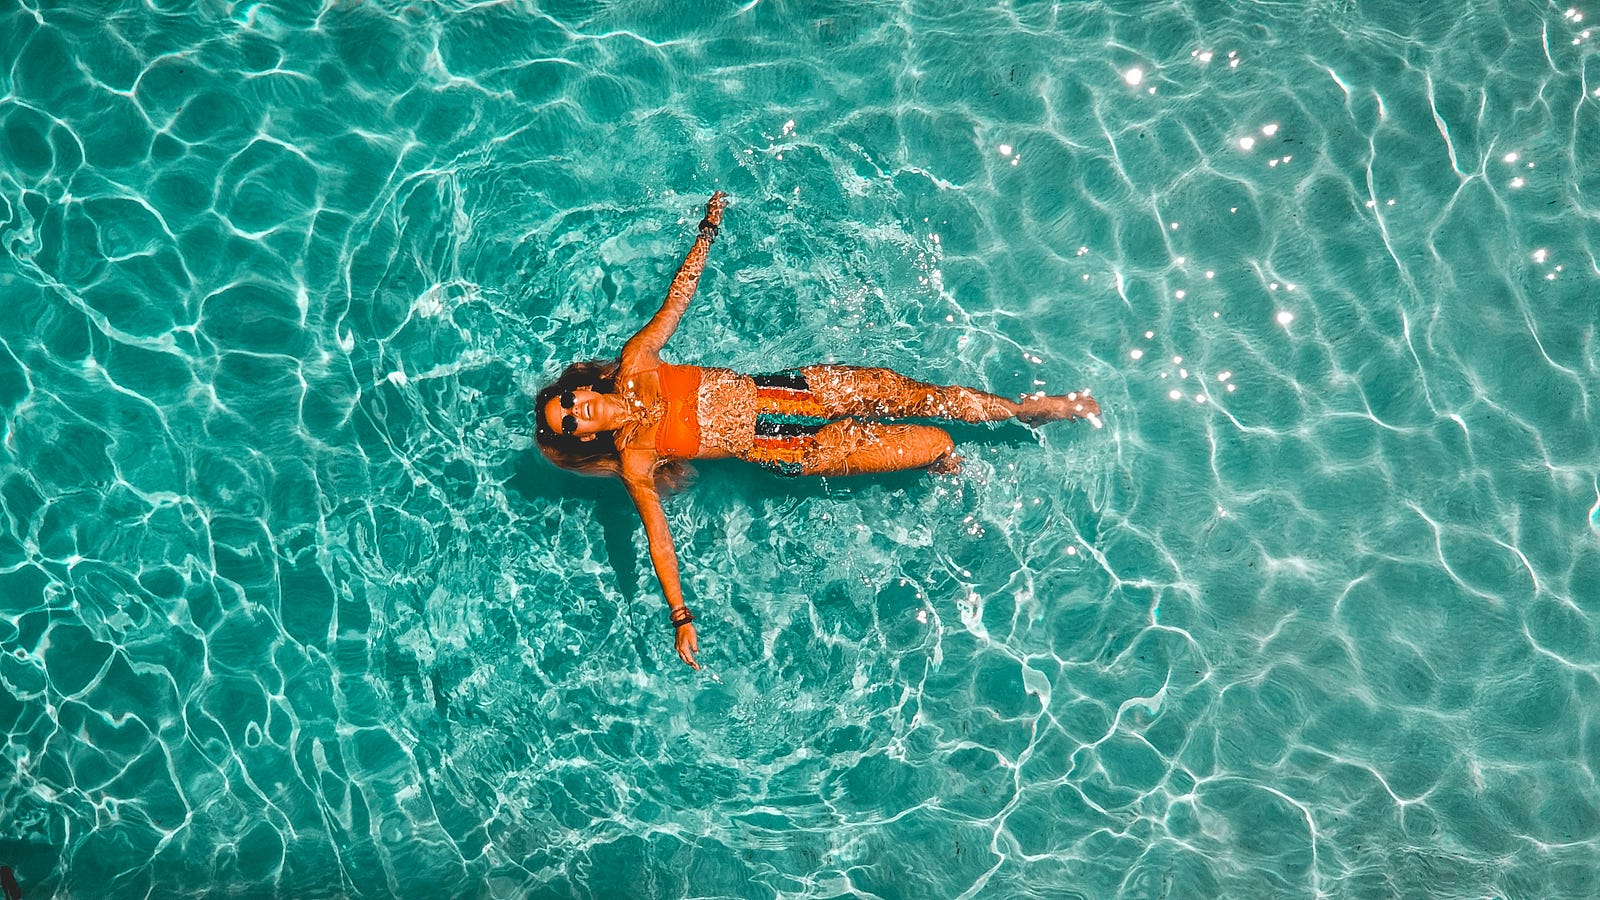 A woman swims on her back in a swimming pool, as seen from above.